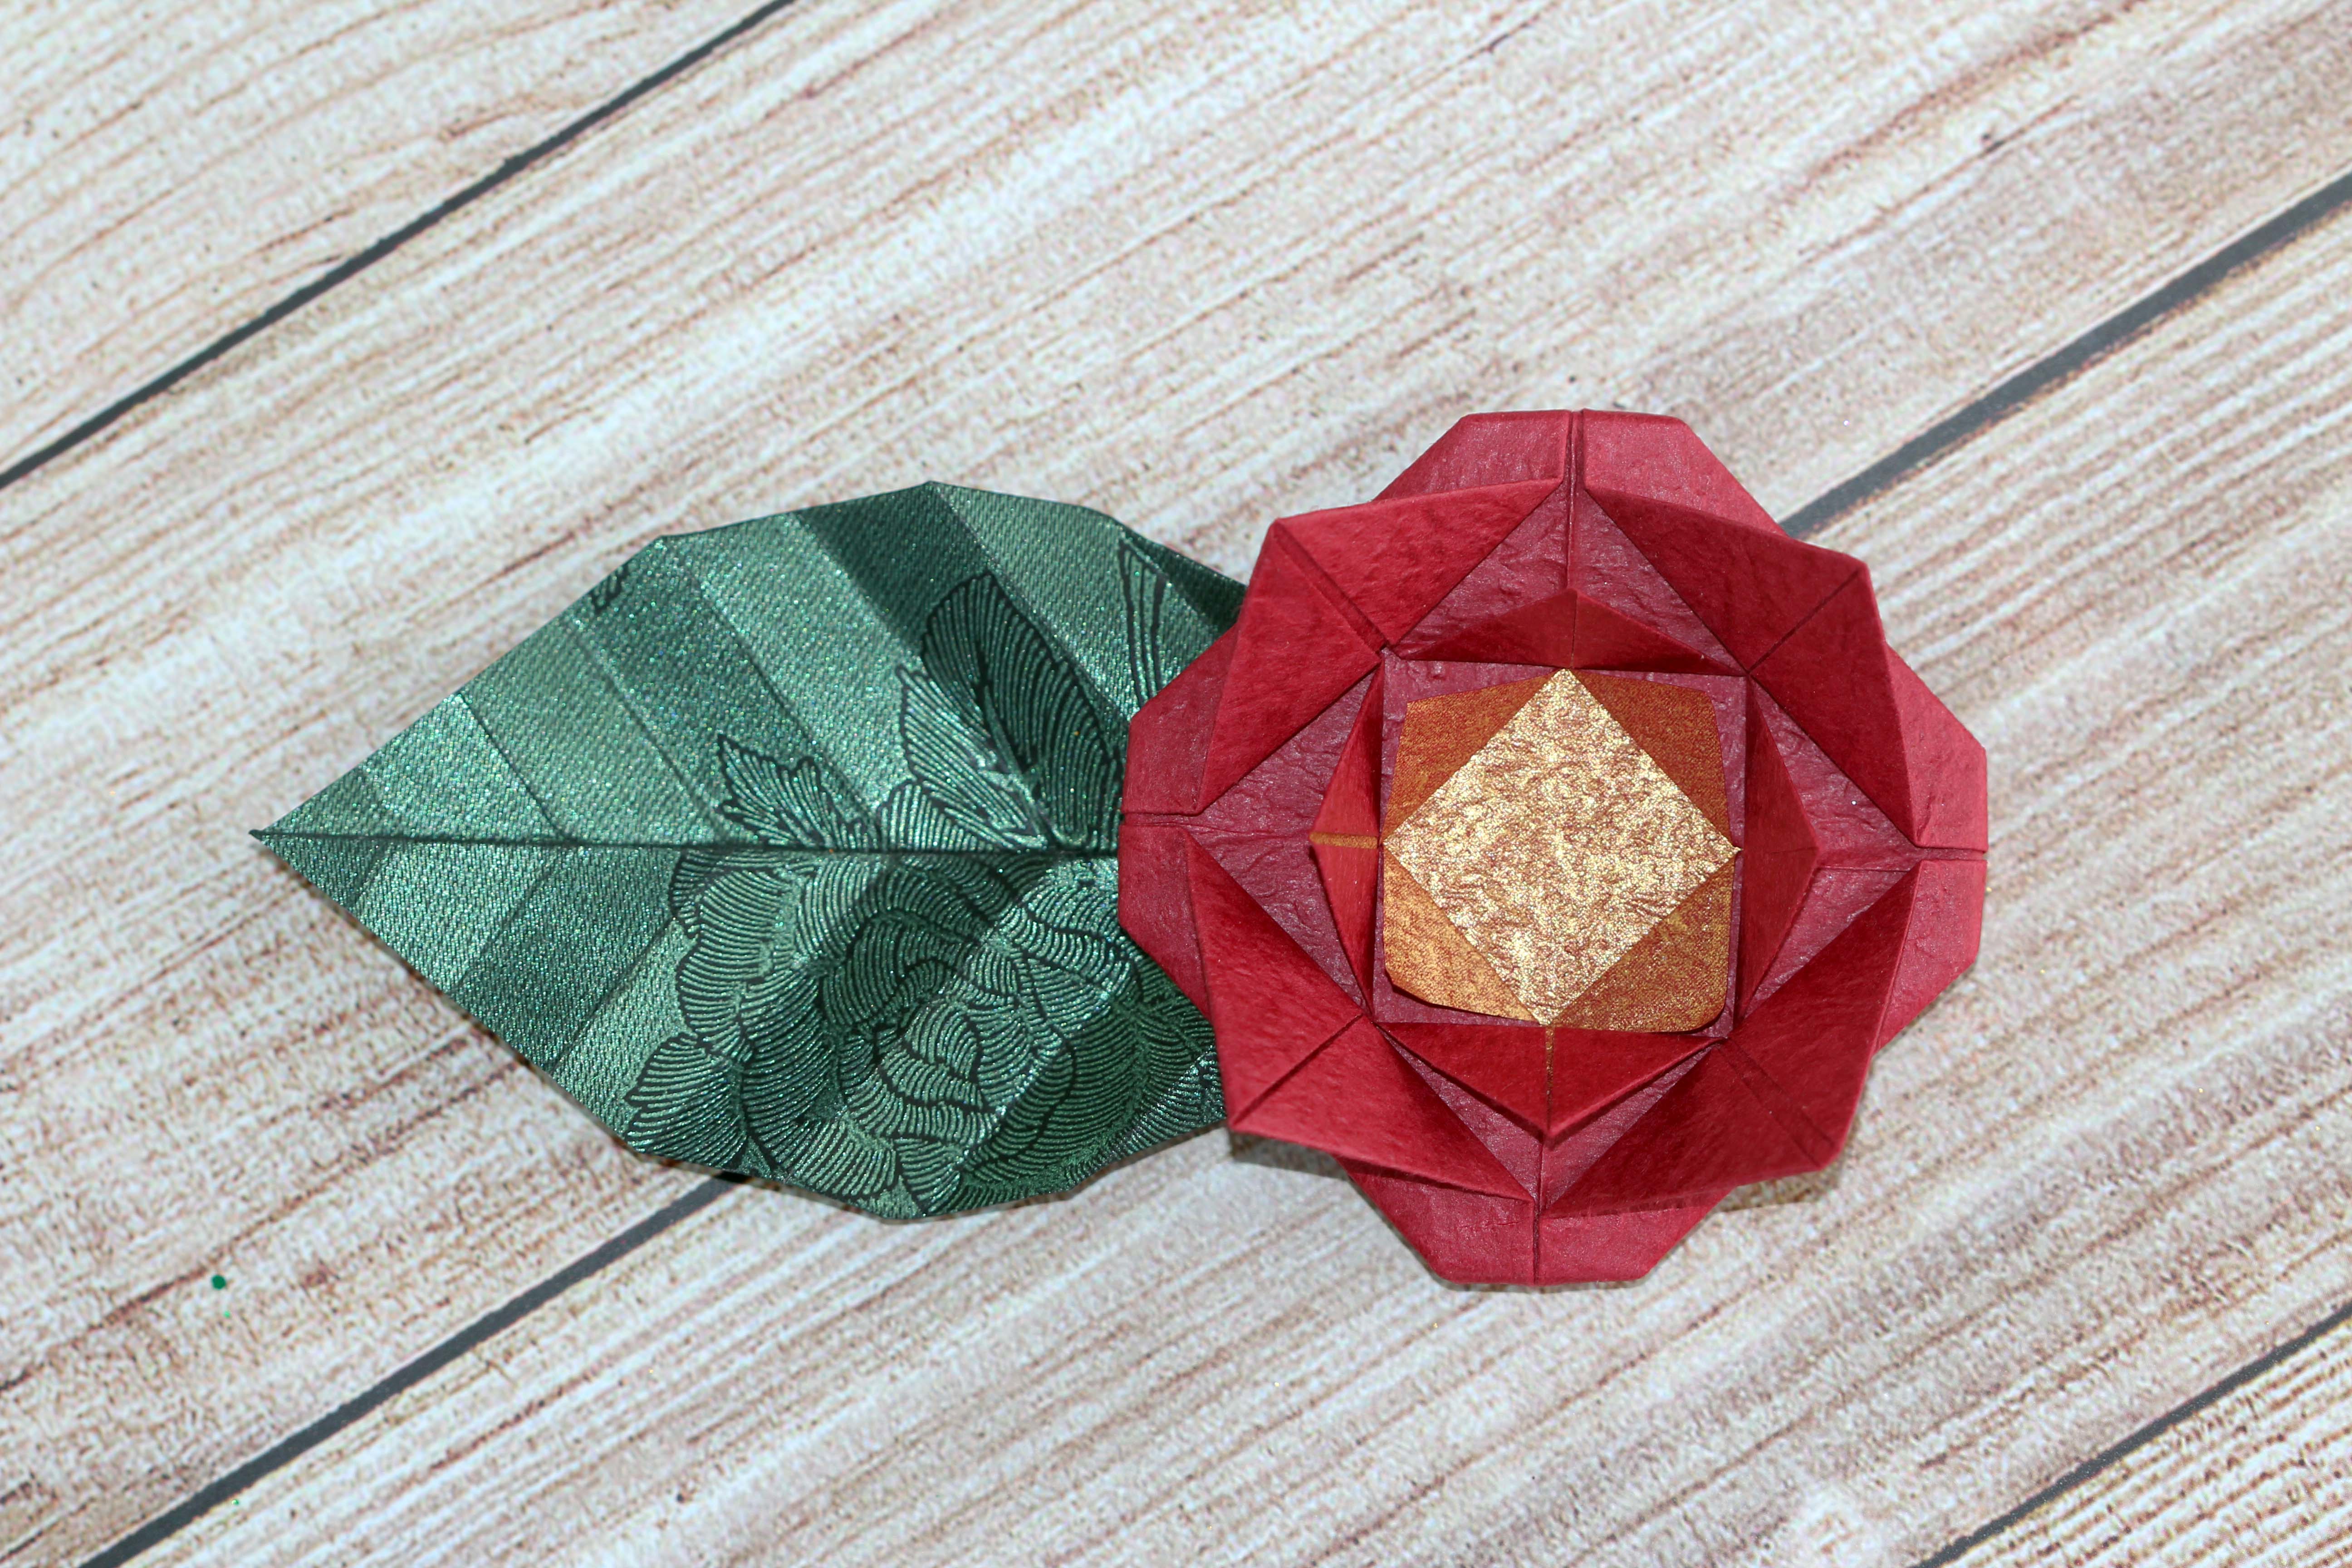 Photograph of the finished origami rose that you will learn to make in this article